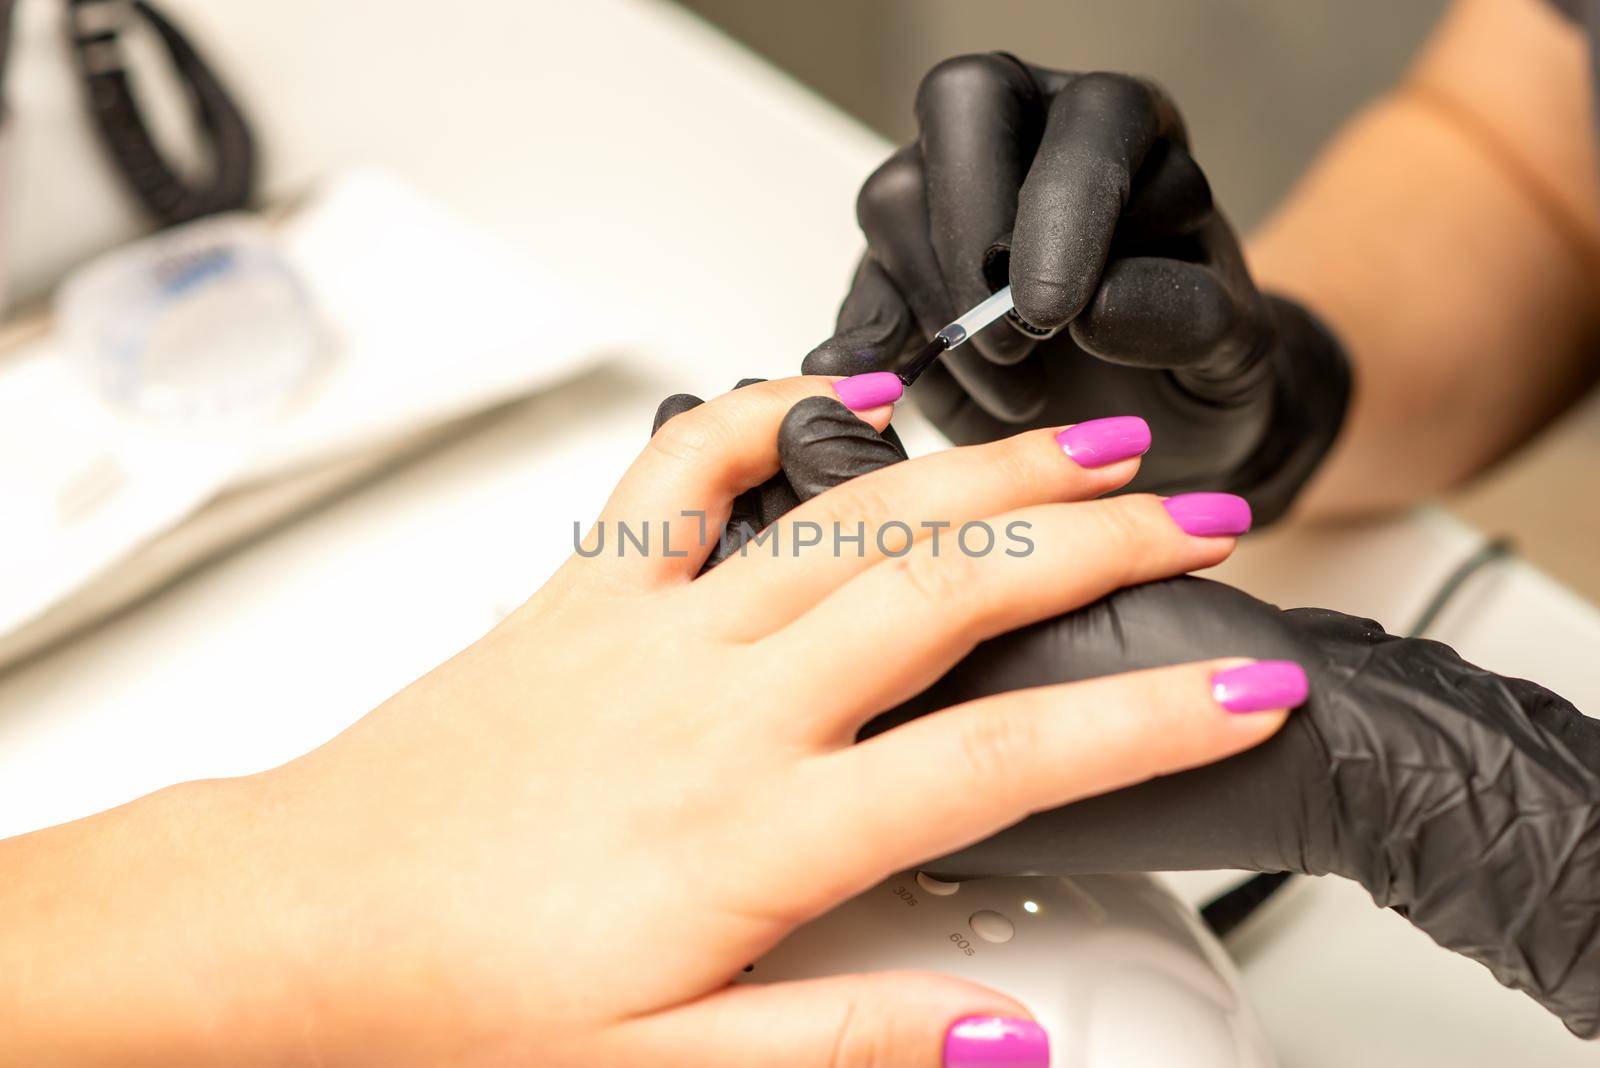 Professional manicure. A manicurist is painting the female nails of a client with purple nail polish in a beauty salon, close up. Beauty industry concept. by okskukuruza